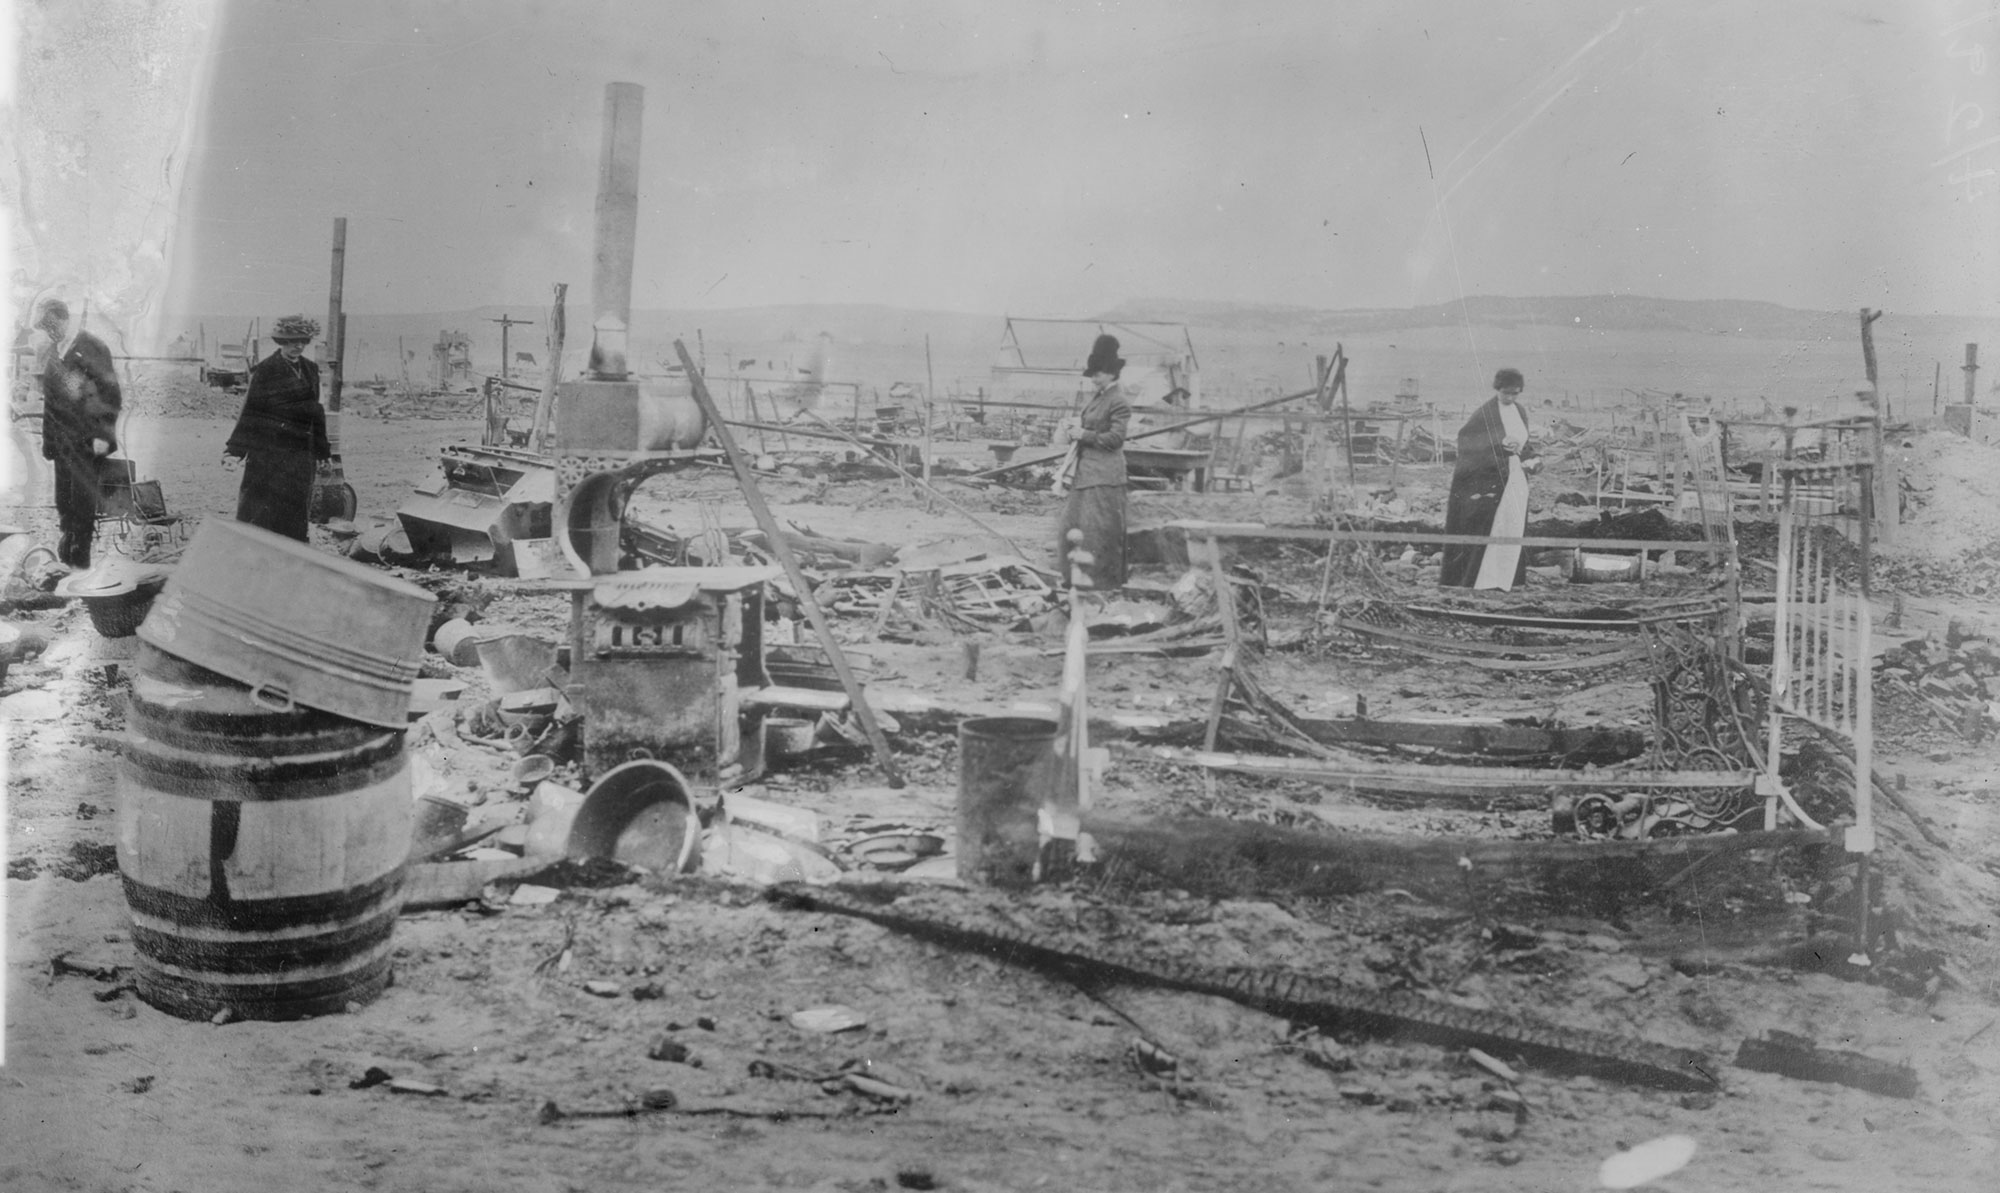 Black and white photo showing the aftermath of the Ludlow massacre. Three women in long dresses and one man stand in a landscape strewn with debris, including a barrel with a metal basin on top in the foreground and a bedframe. What appears to be a chimney is in the background.